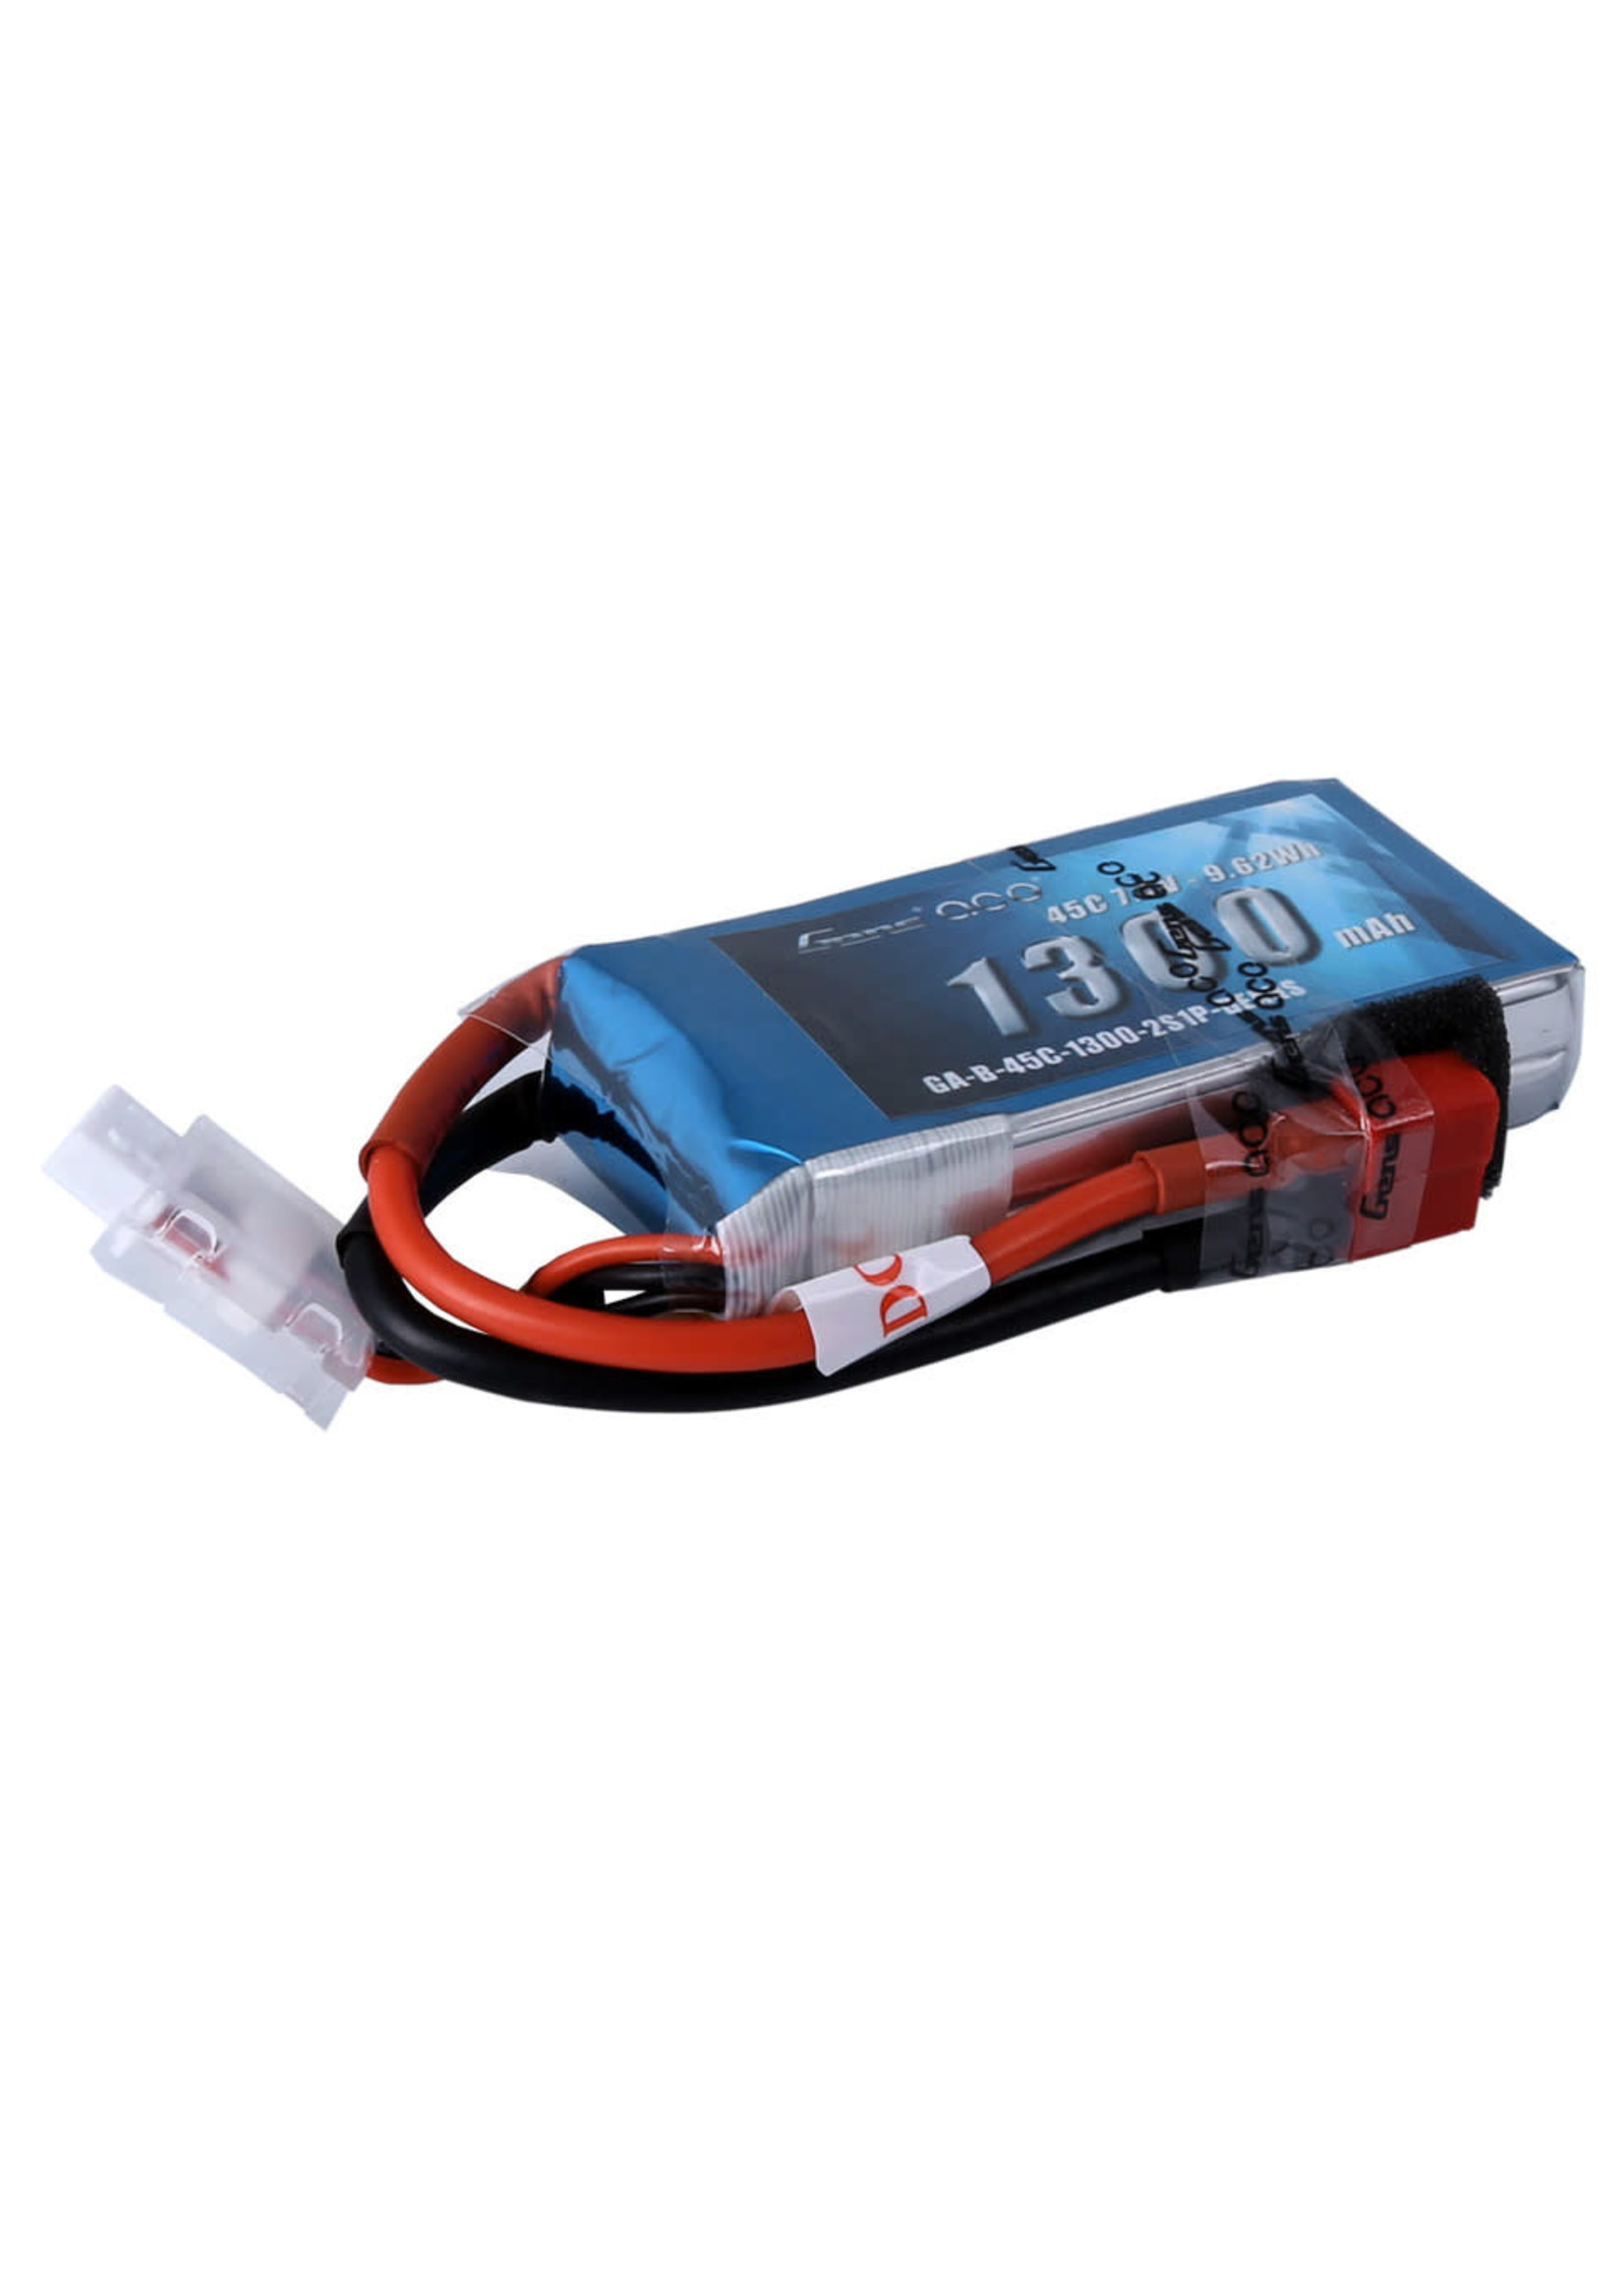 Gens ace Gens Ace 1300mAh 7.4V 45C 2S1P Lipo Battery Pack With Deans Plug